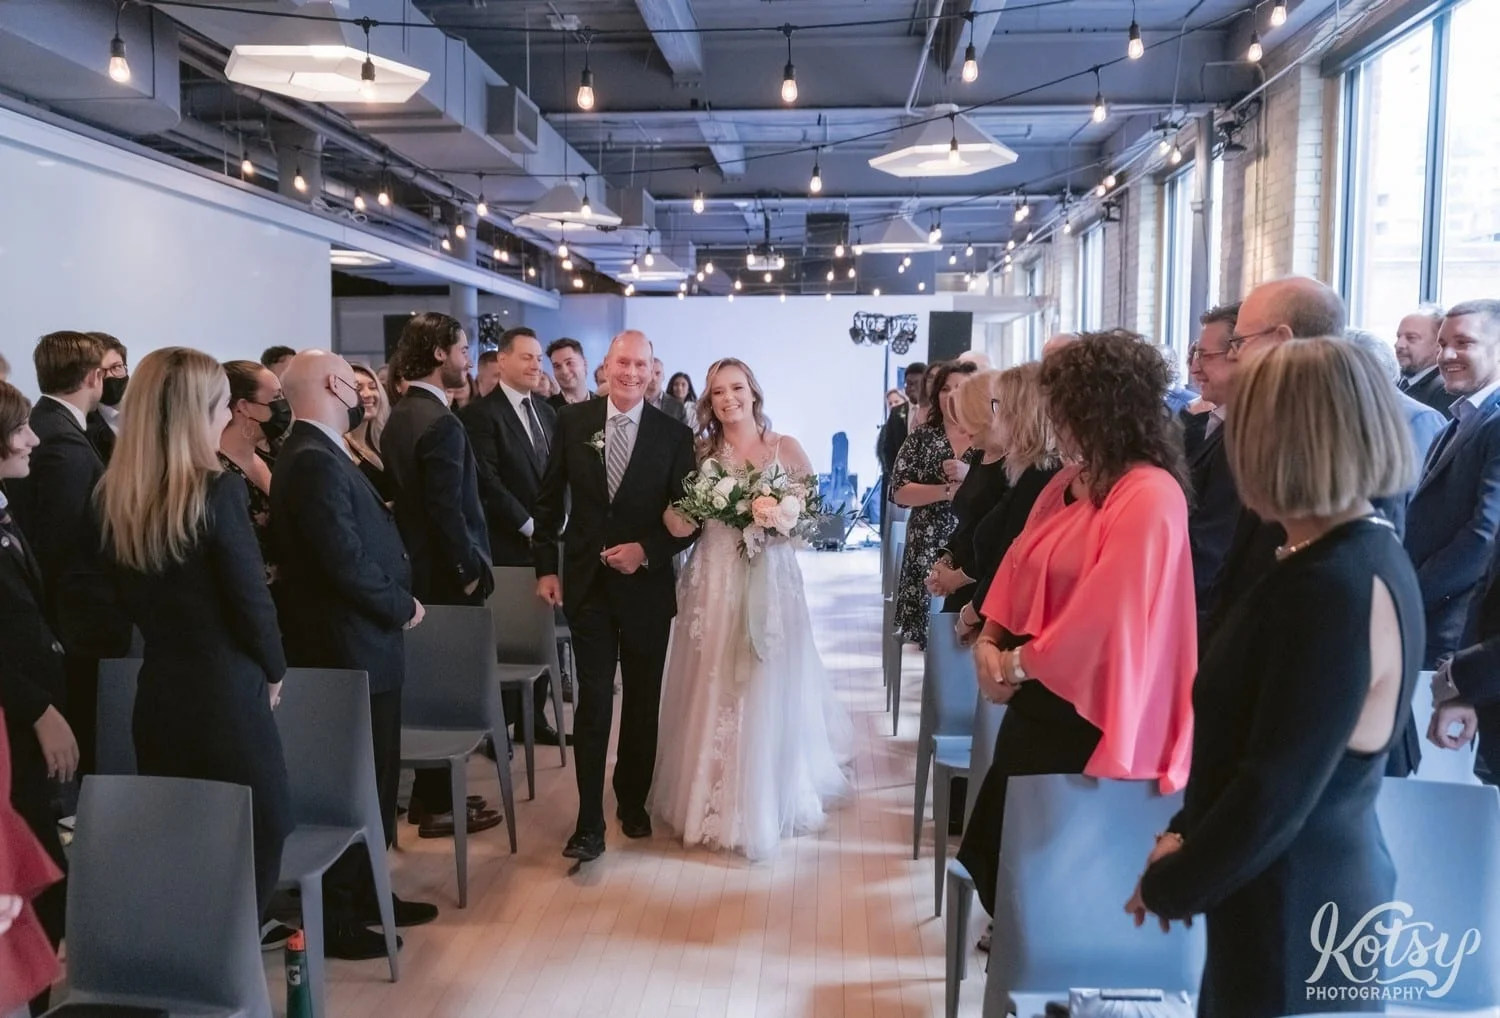 A wide shot of a bride and a white bridal gown holding a bouquet of flowers walks down the aisle with her father wearing a black suit during her Second Floor Events wedding ceremony in Toronto, Canada